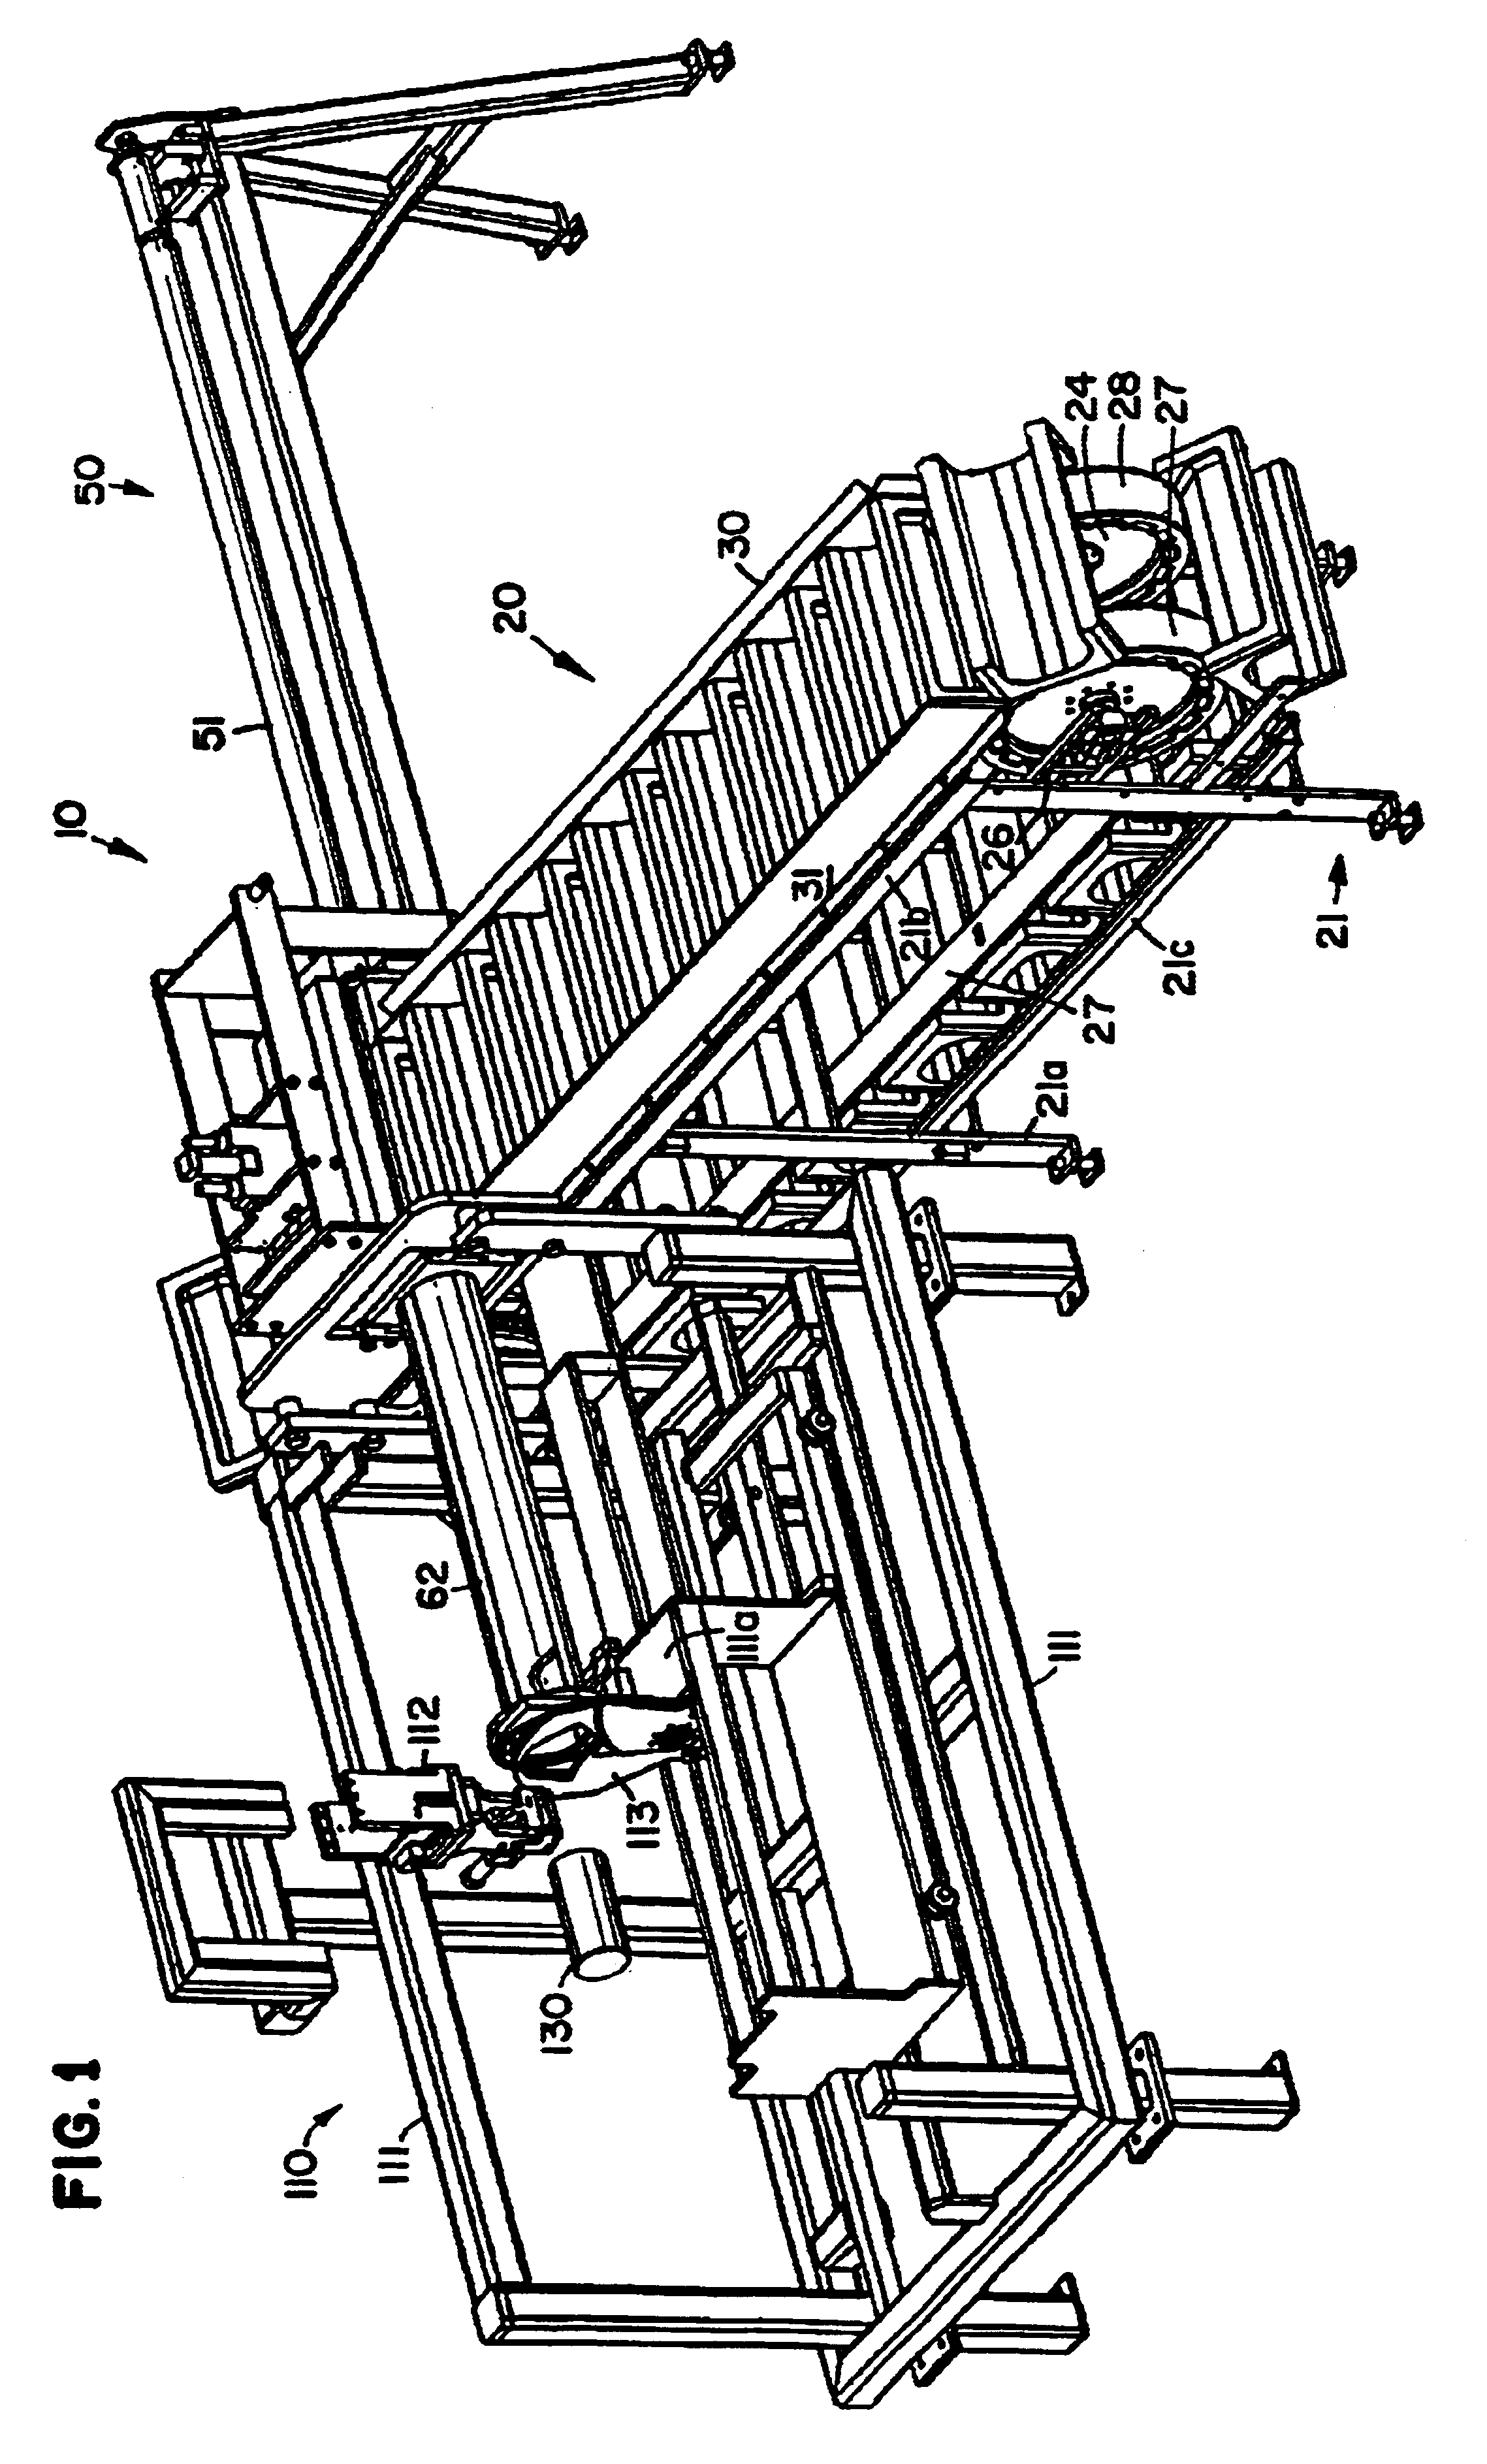 Method and apparatus for stuffing hams